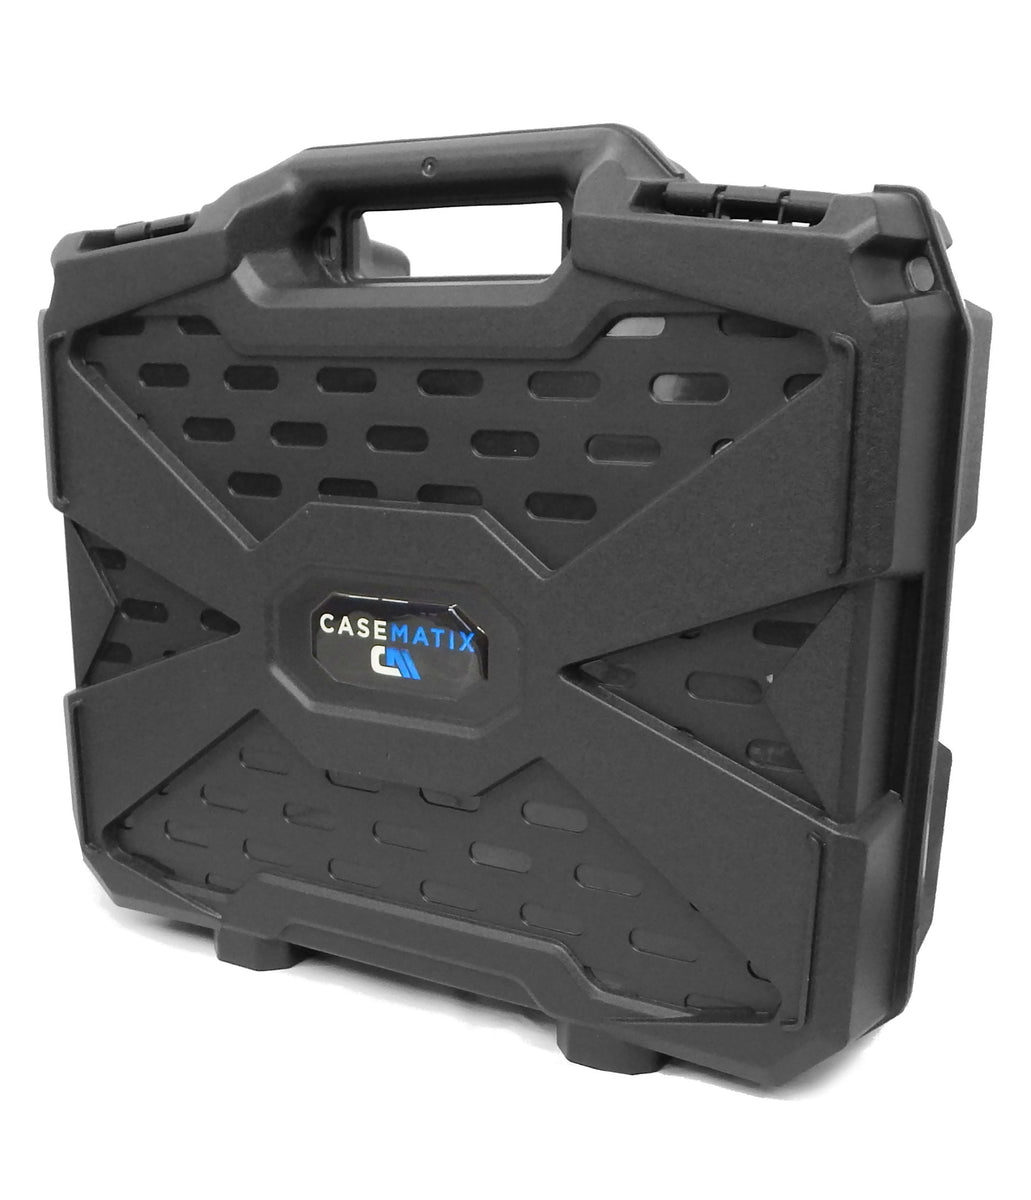 CASEMATIX 16 Hard Travel Case with Padlock Rings and Customizable